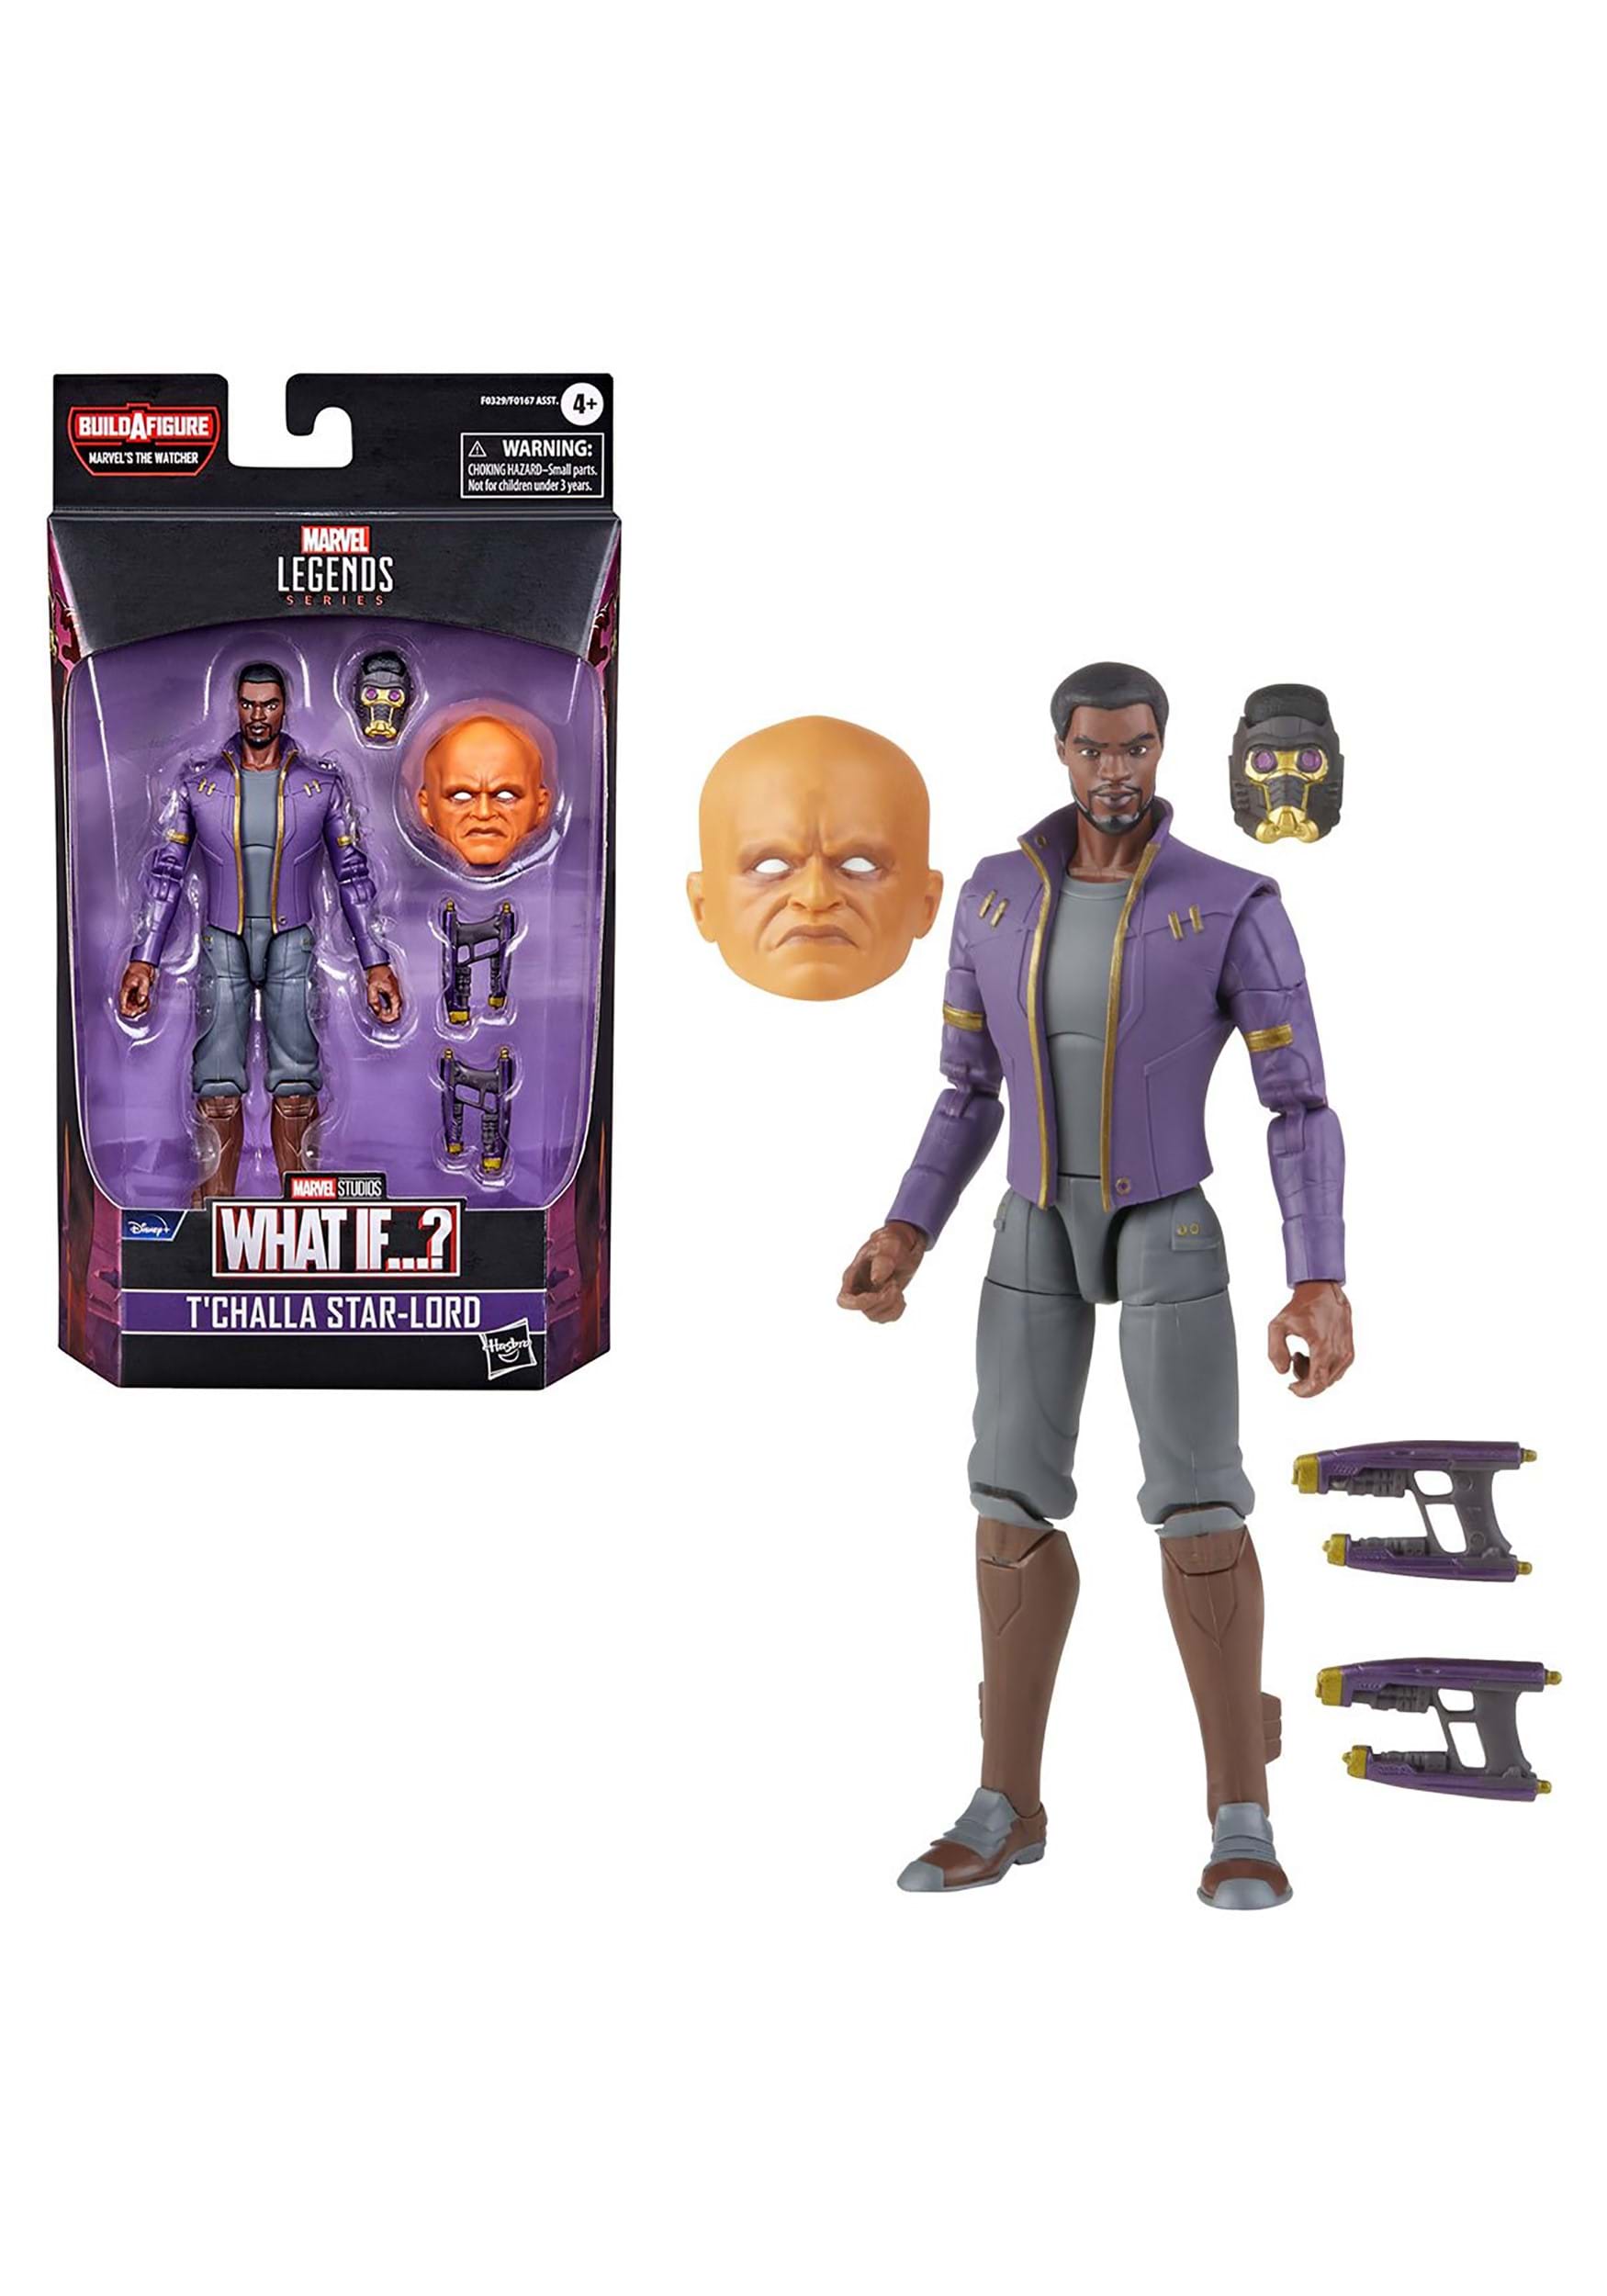 Boneco T'Challa Star Lord WHAT IF? Marvel Legends Series